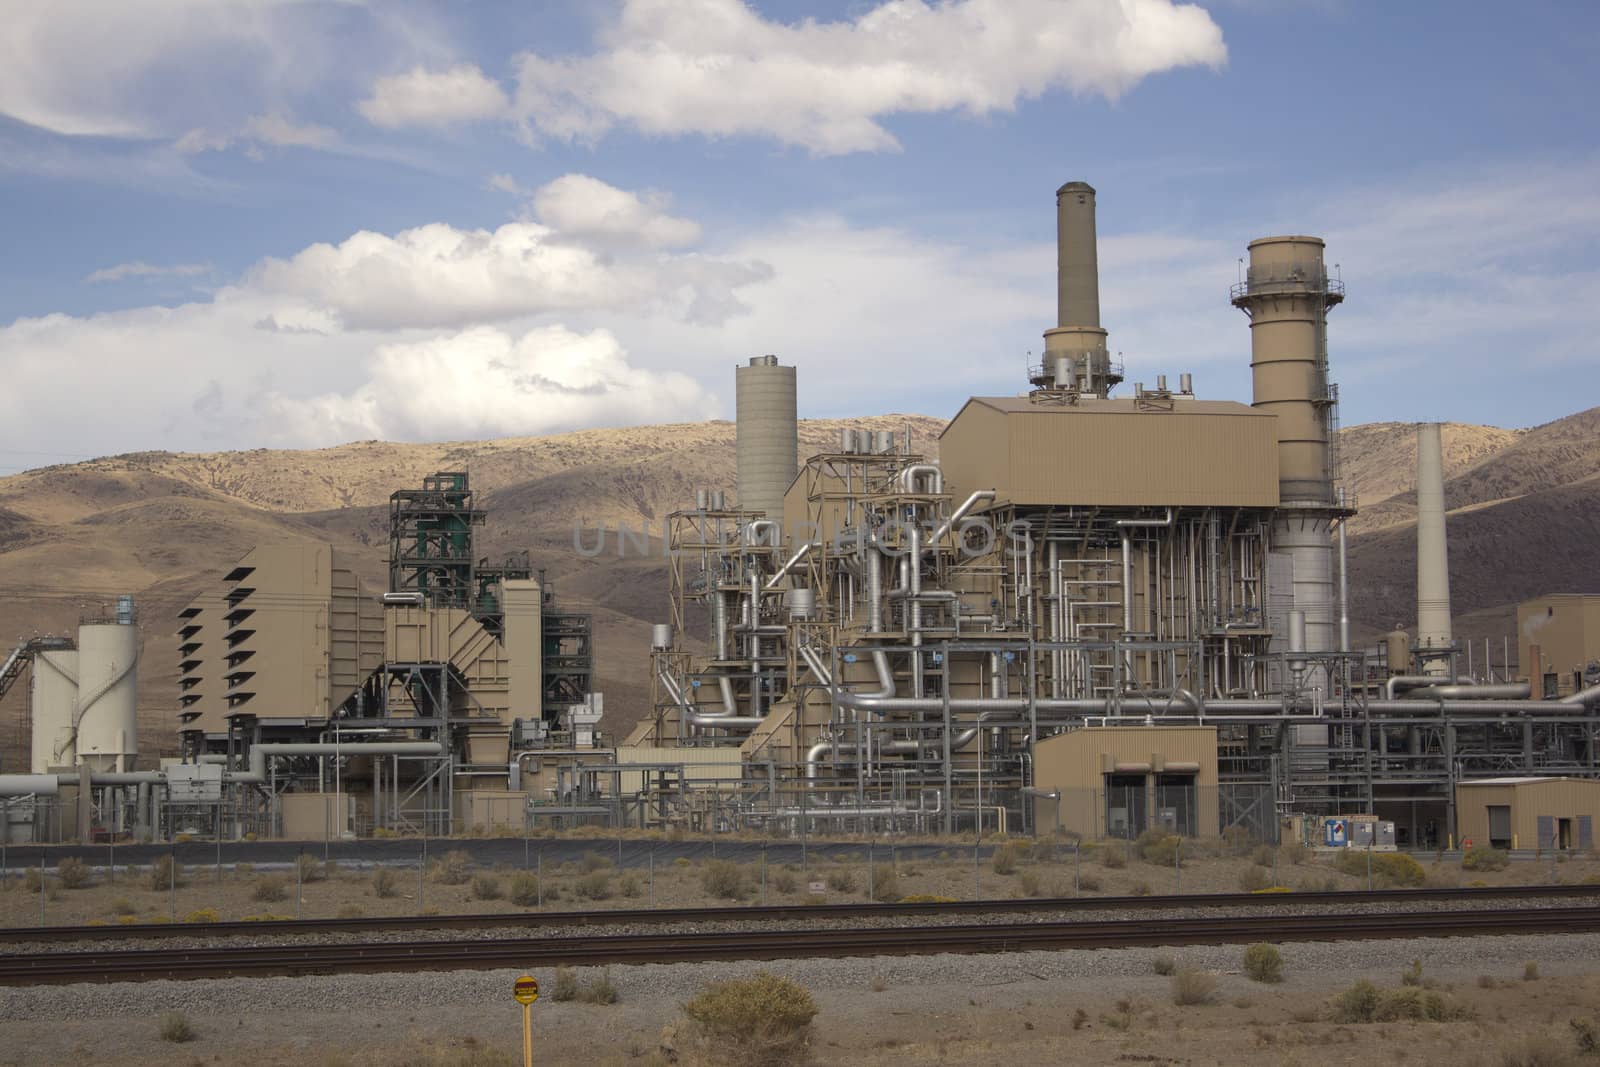 Power plant factory next to train track in the desert by jeremywhat